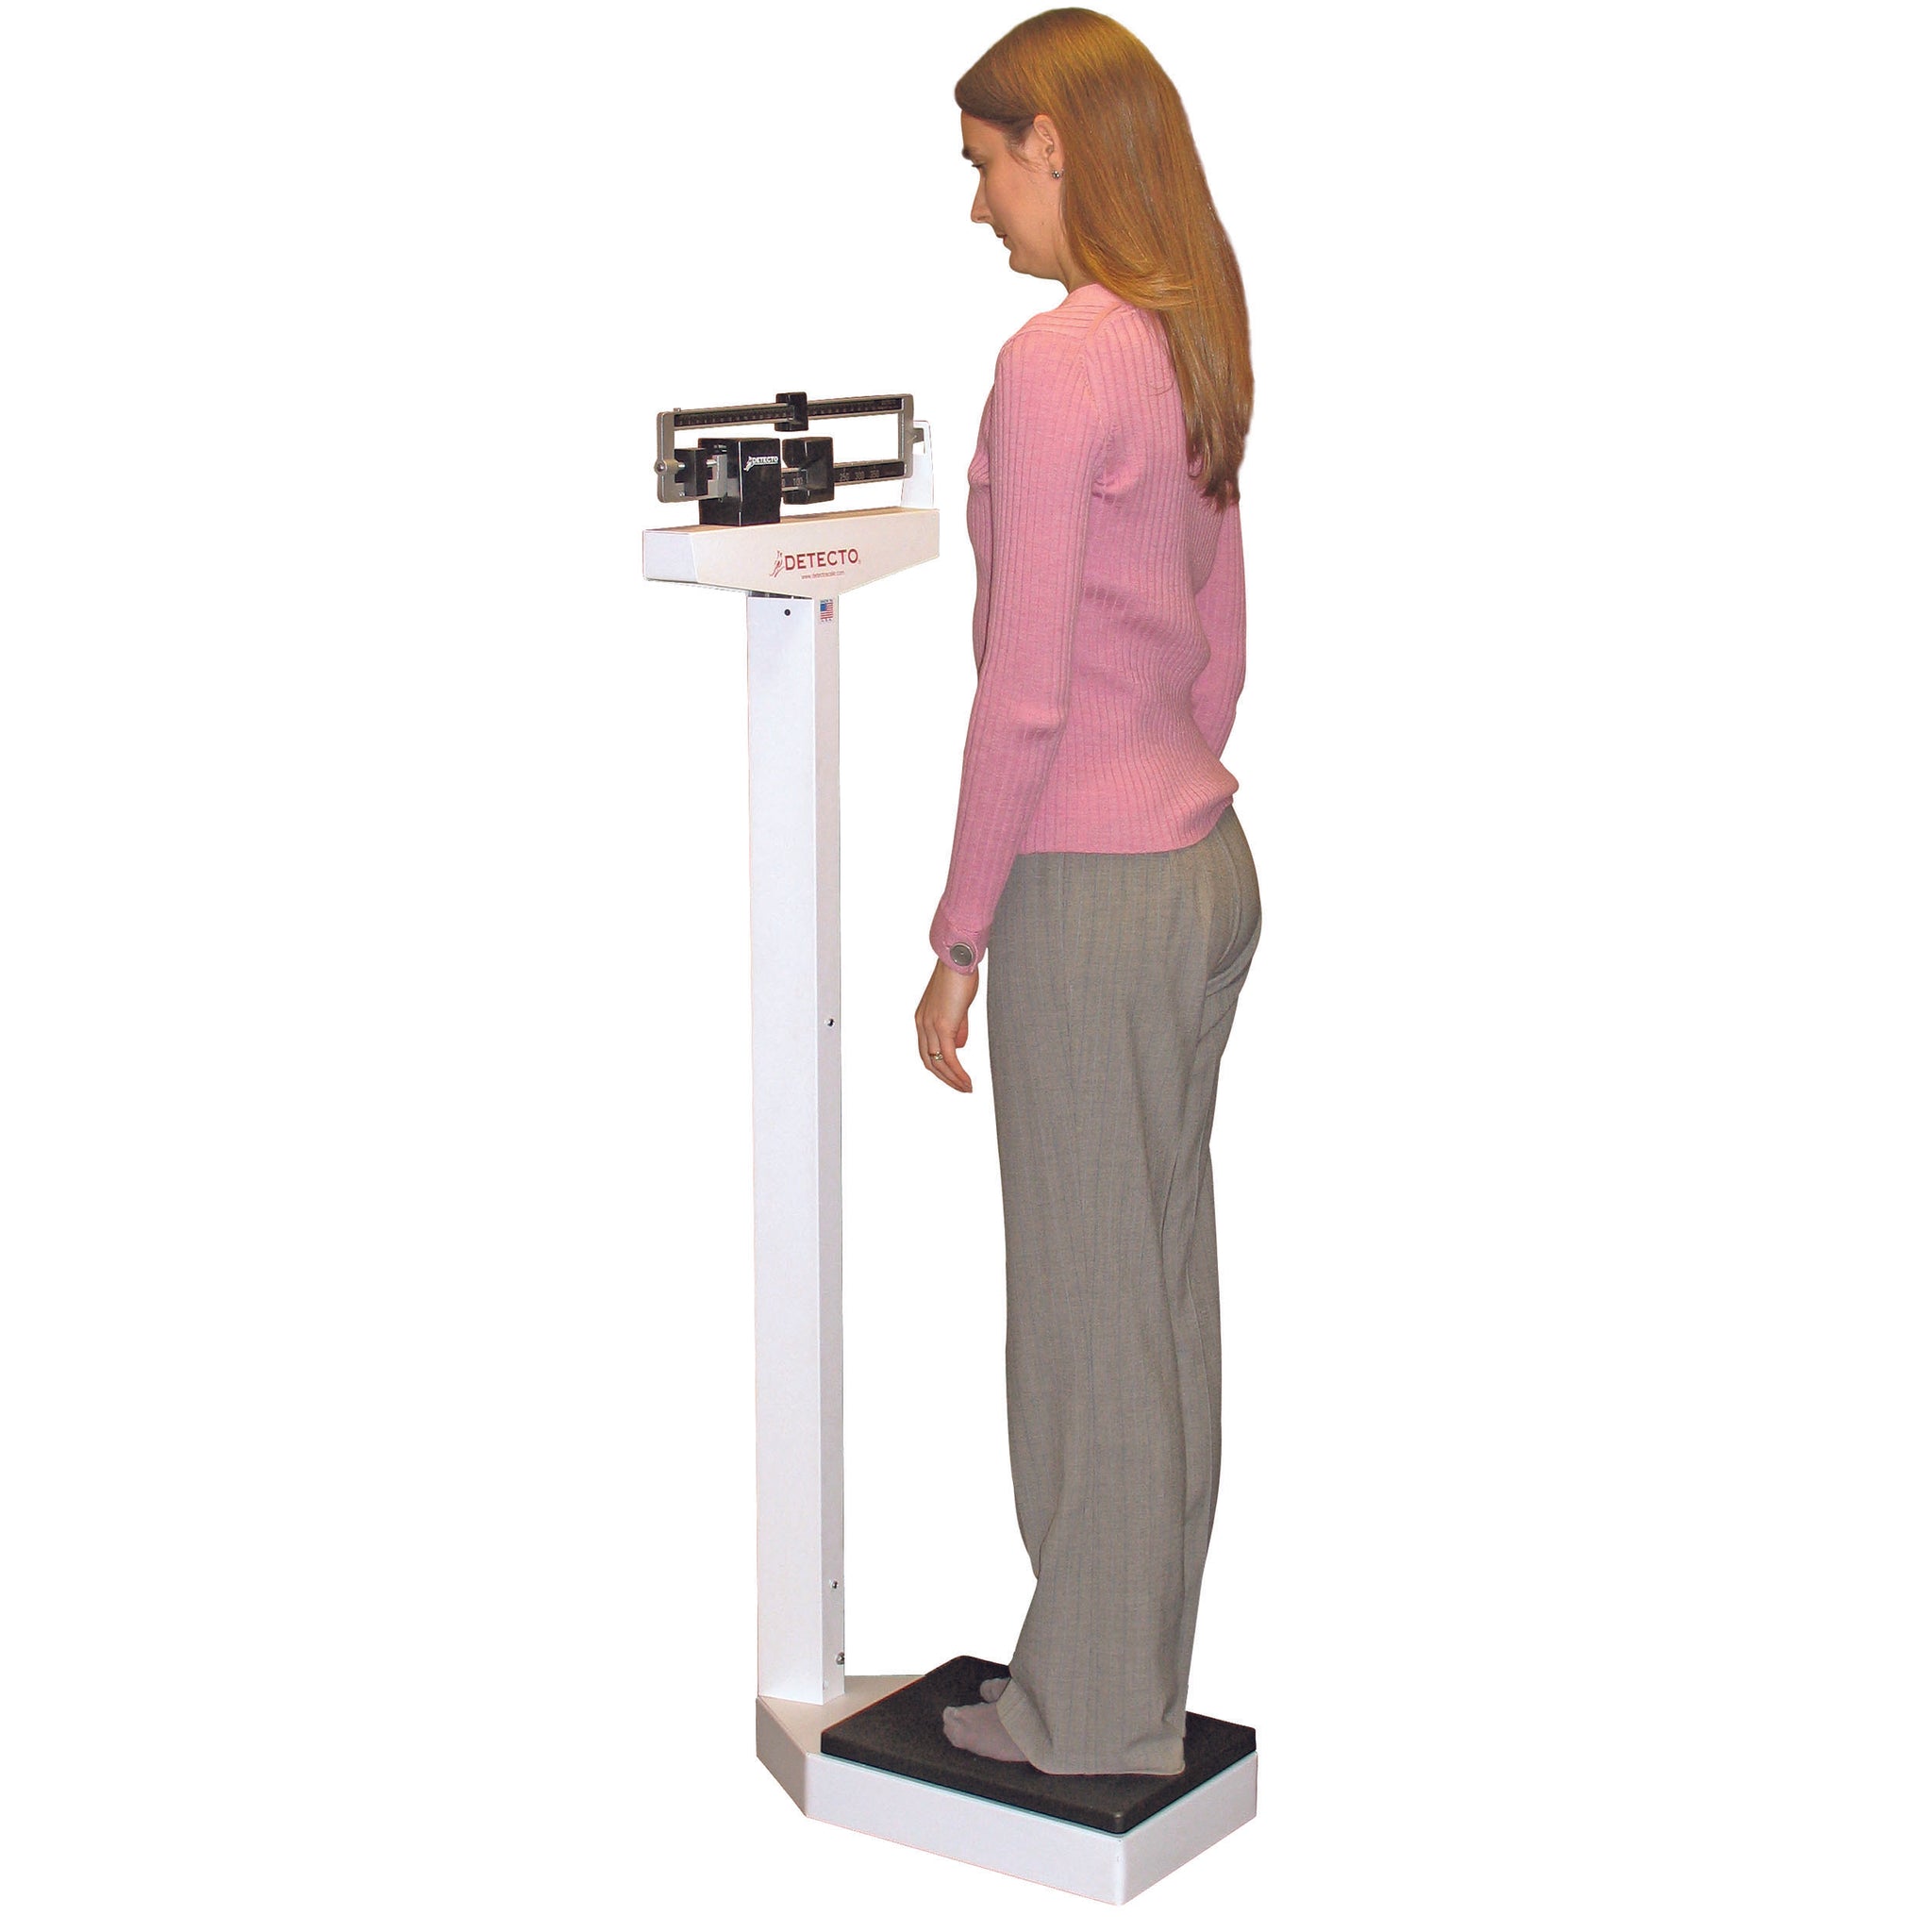 Detecto Stainless Steel Weigh/Beam Physician Scale